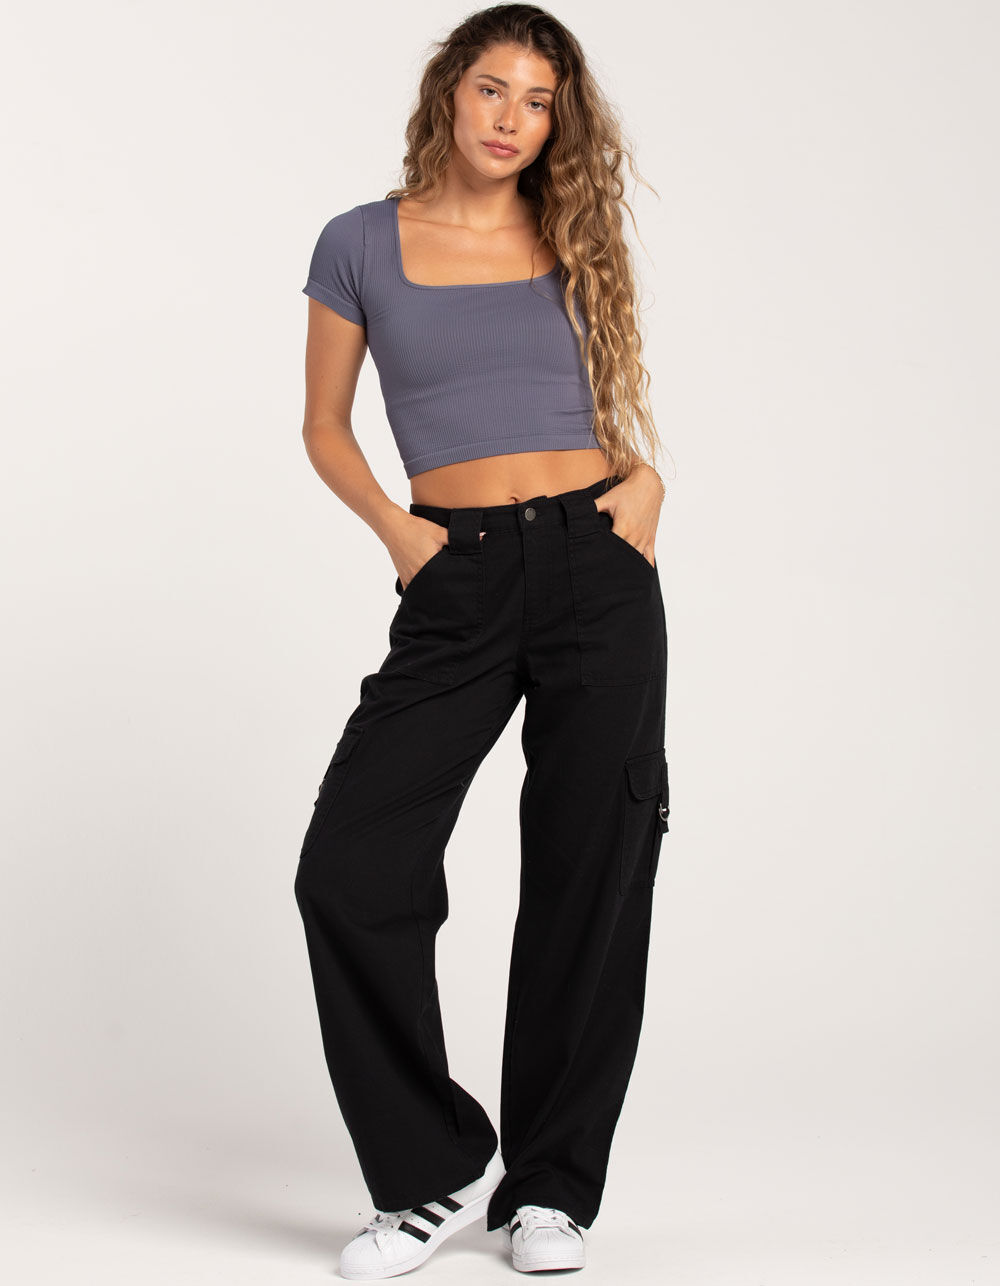 Buy Juicy Couture Girls Tape Wide Leg Joggers Black